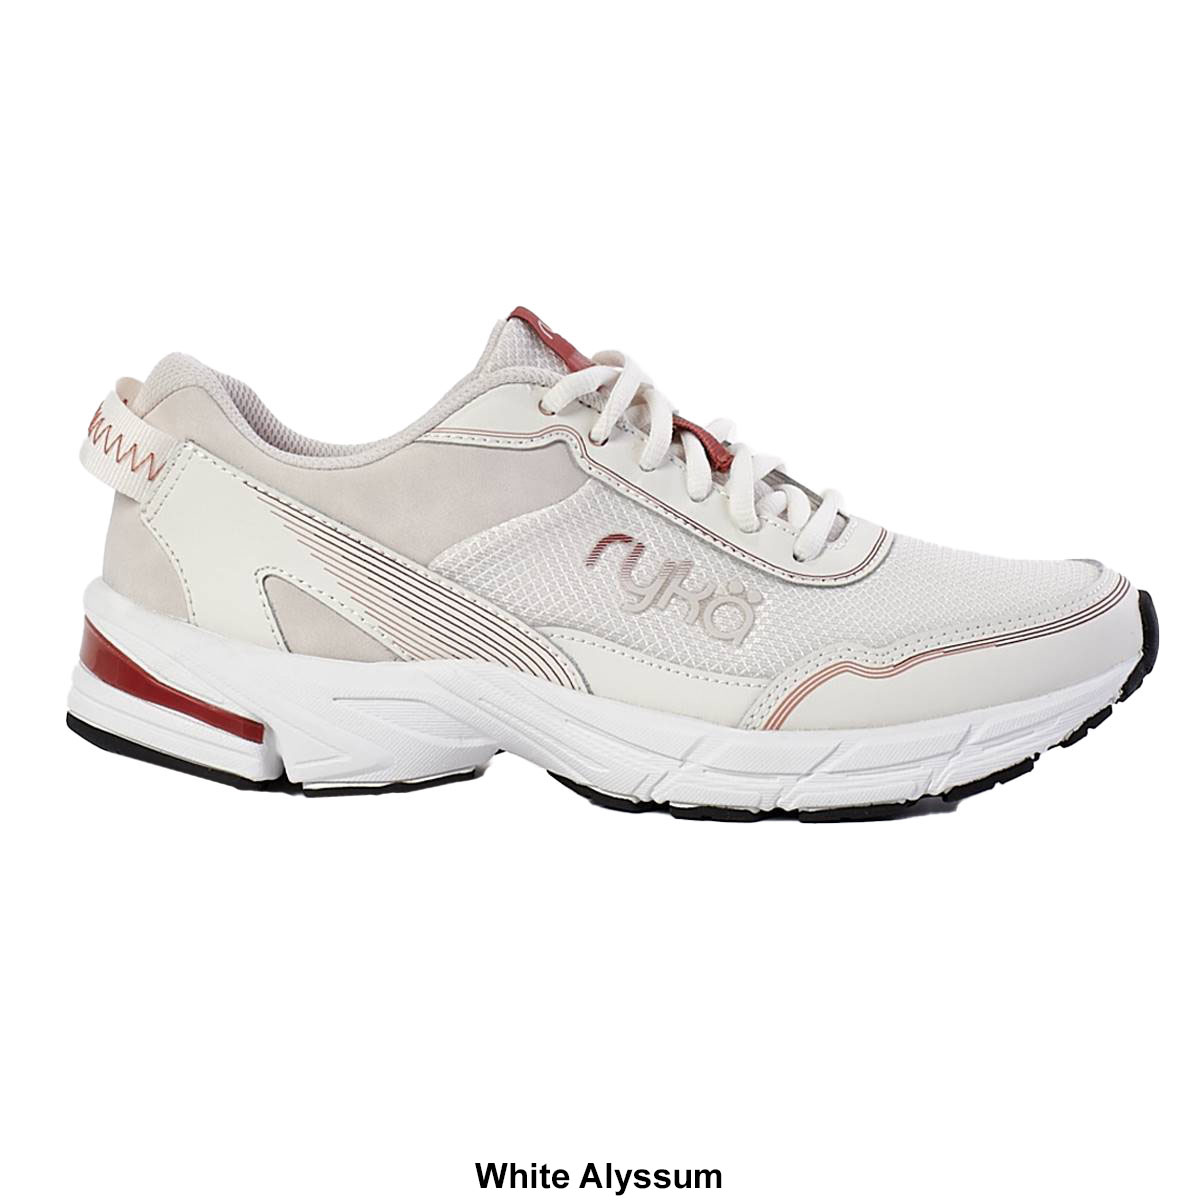 Womens Ryka Insight Athletic Sneakers